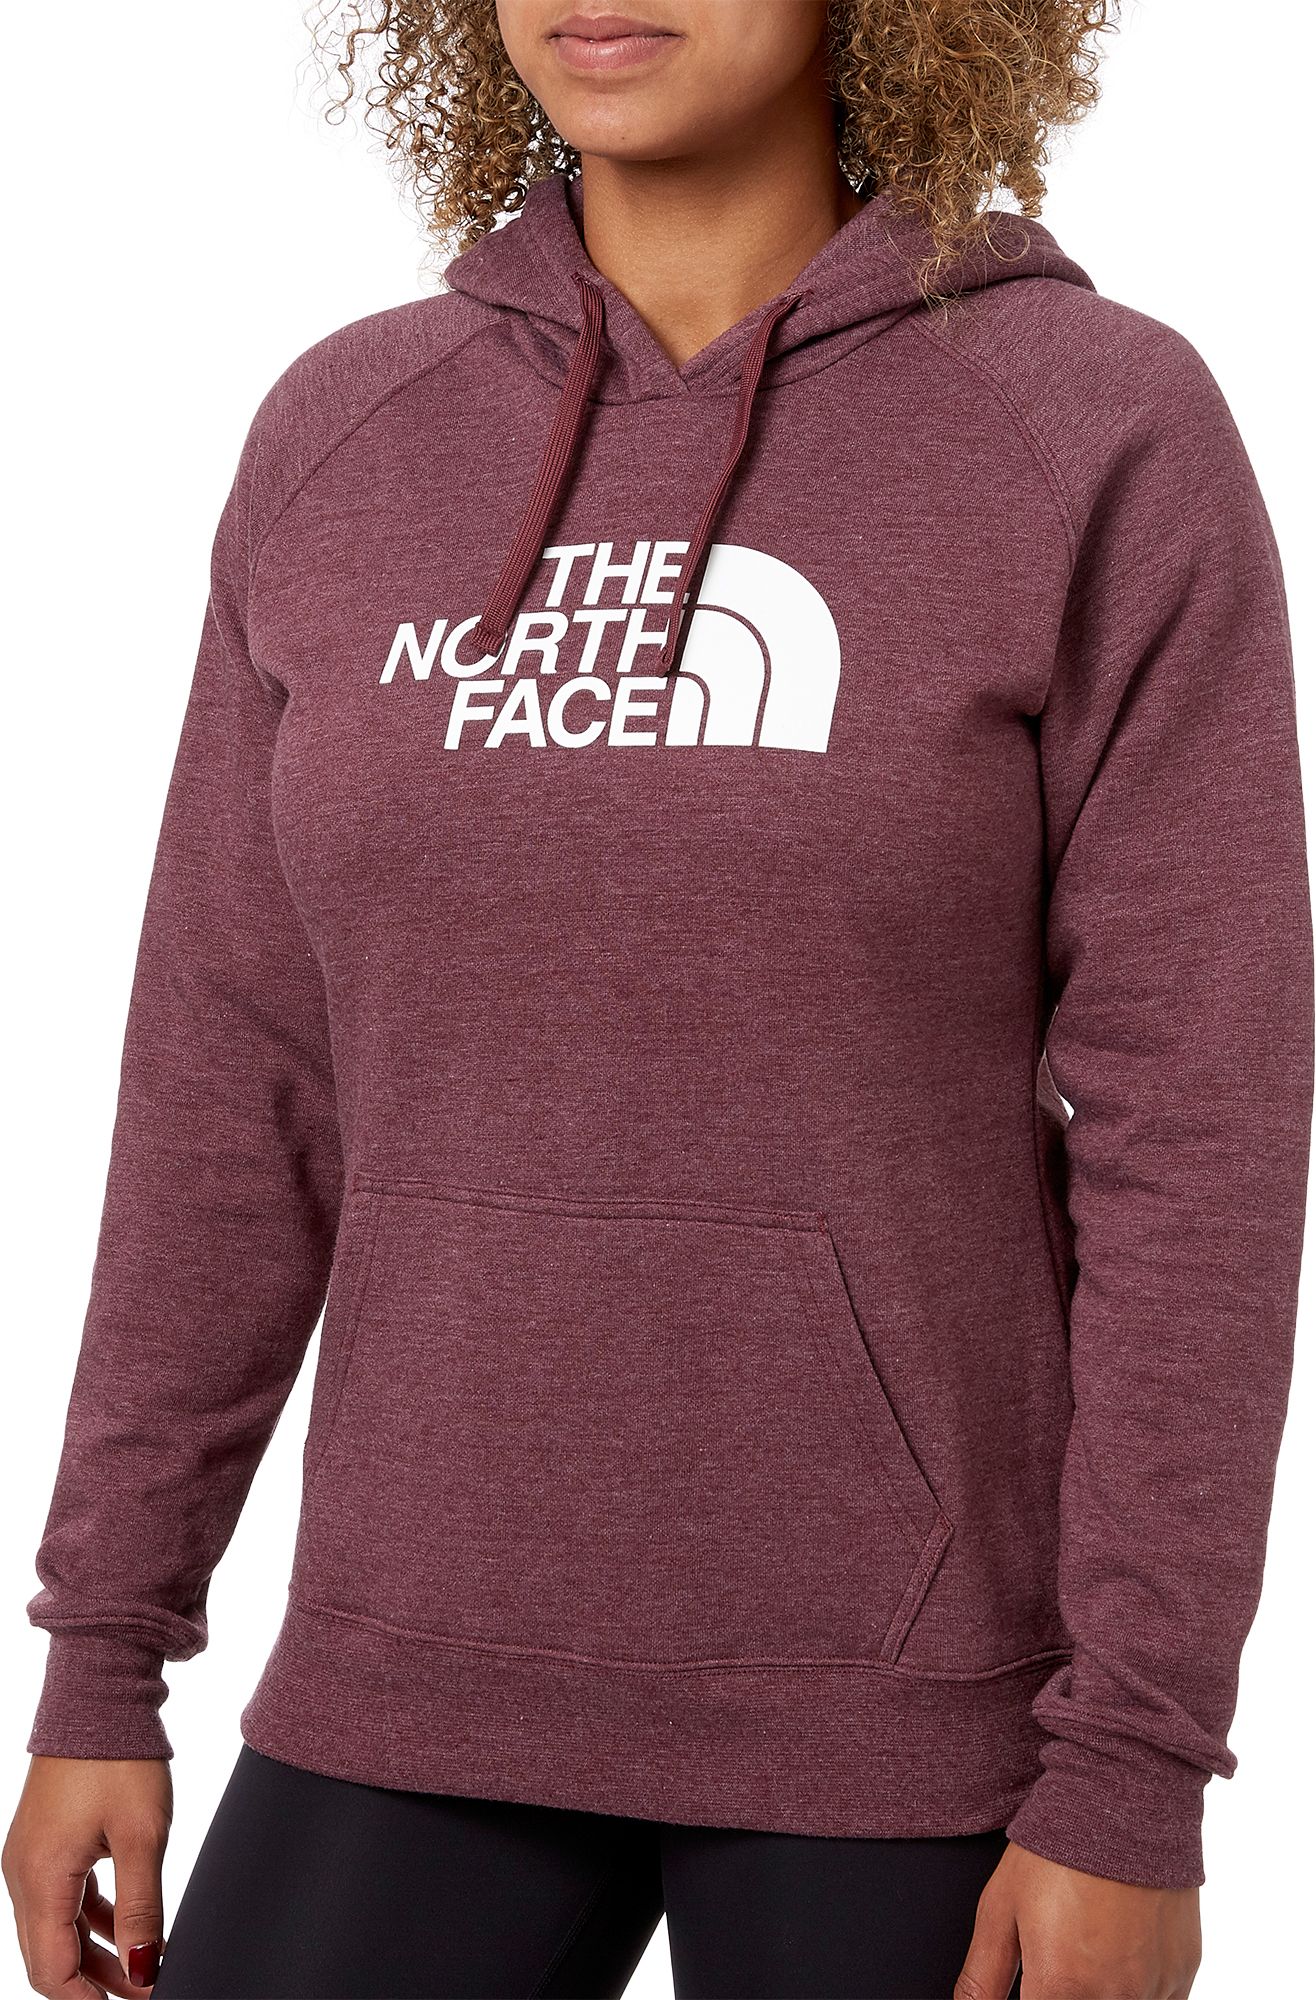 the north face burgundy hoodie